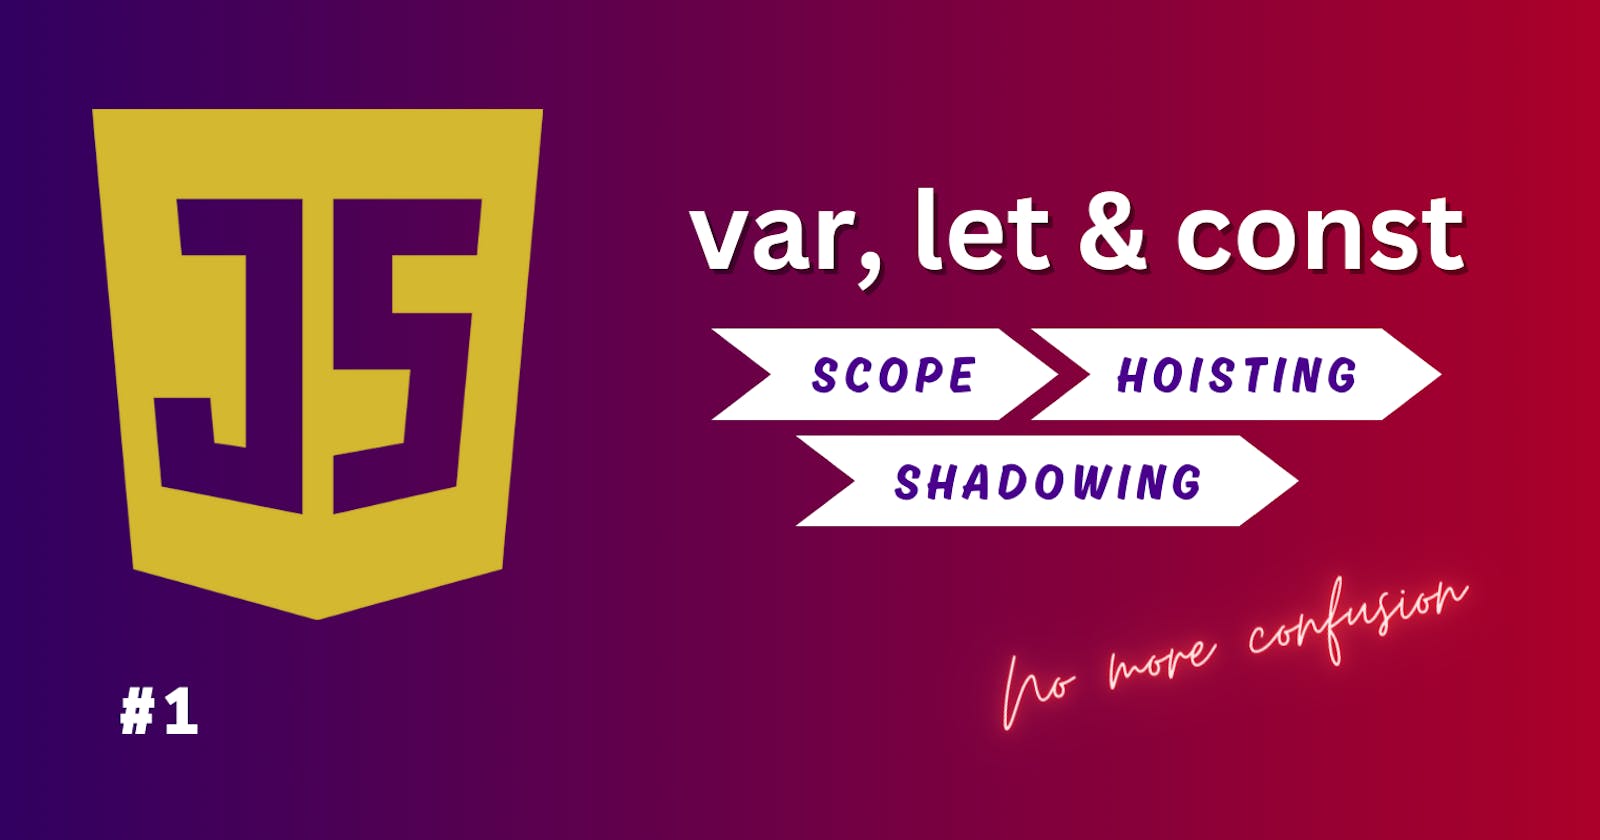 Easy Scopes with var, let, const - No More Confusion!